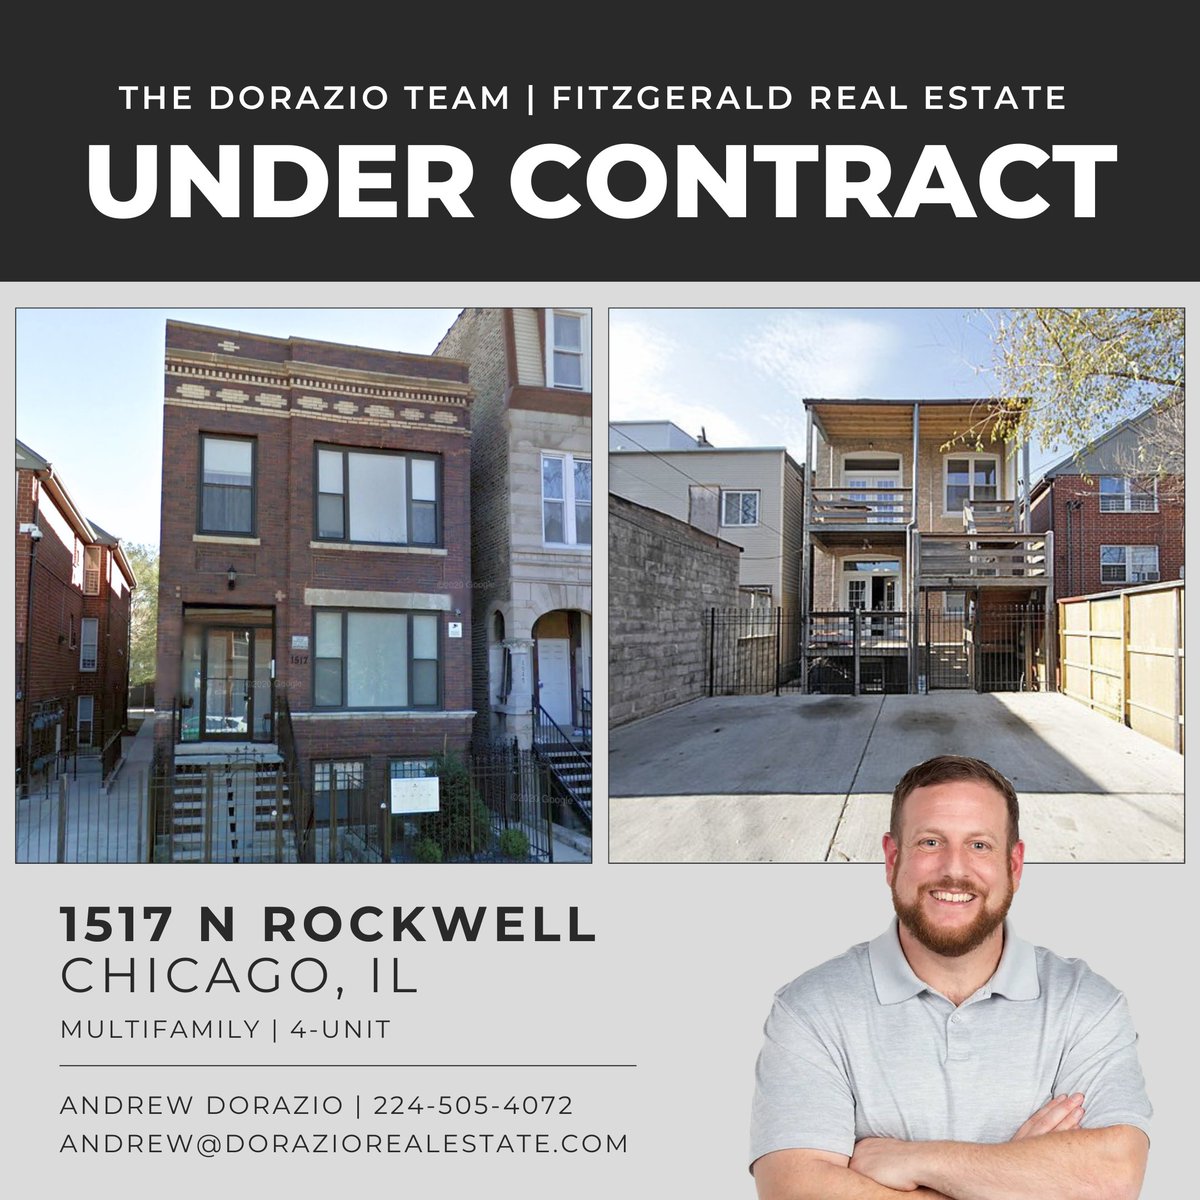 🏆 Another #multifamily contract win today! Excited for our client on getting this high-potential investment property just a few blocks from beautiful #humboldtpark #undercontract. 💯

#doraziorealestate #investmentproperty #multifamilyinvesting #multifamilyrealestate